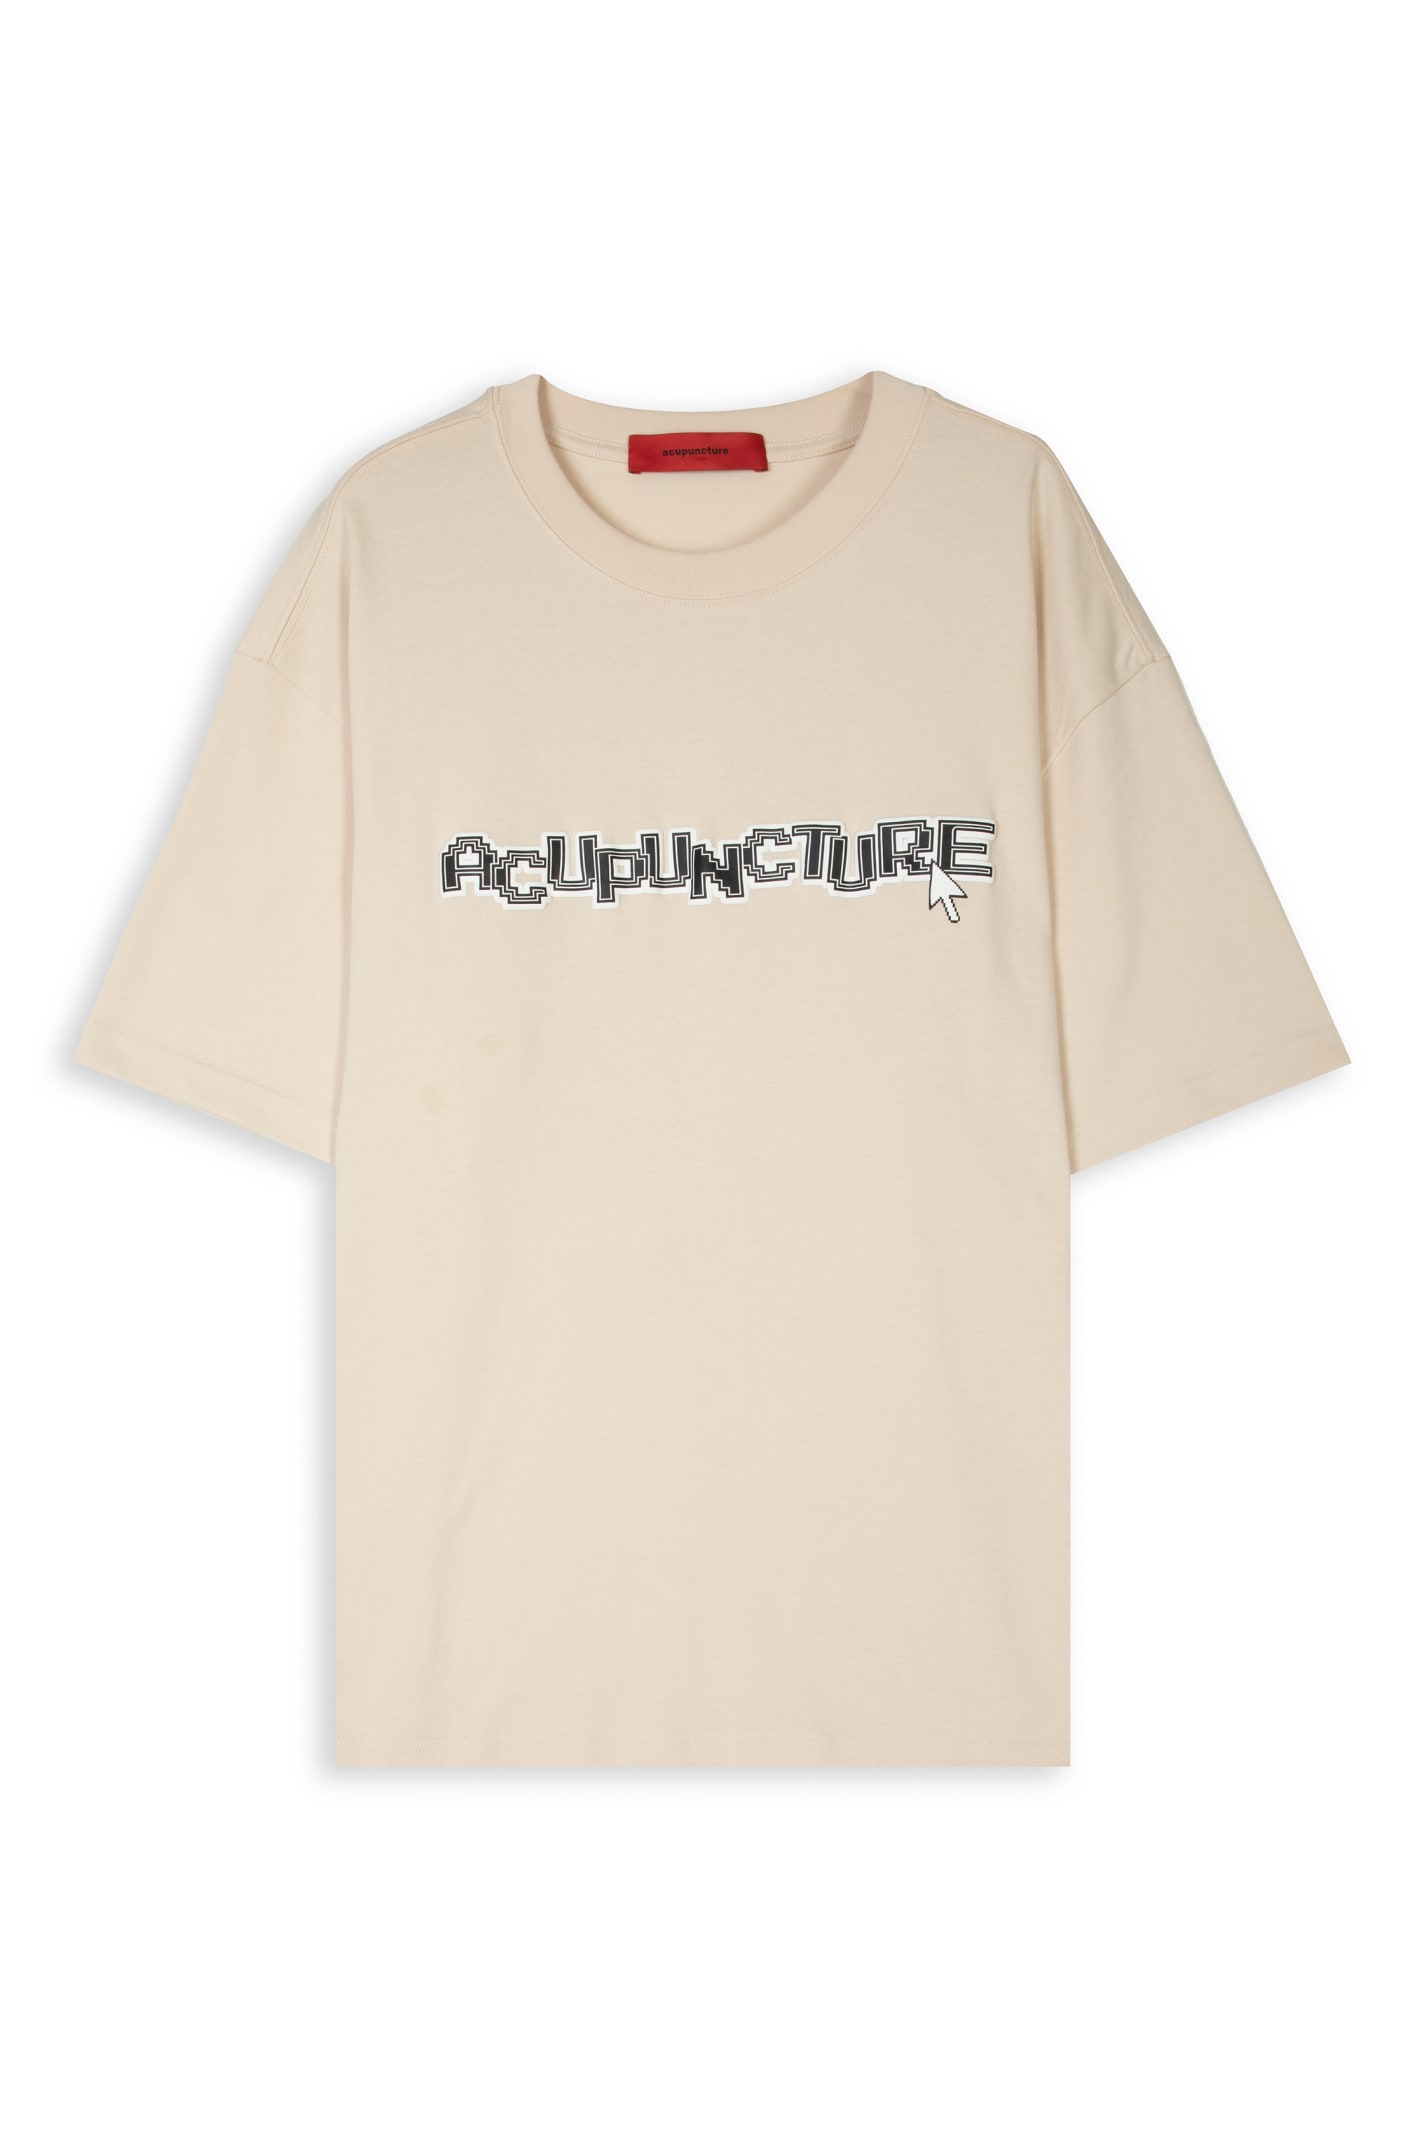 Acupuncture Goodmorning Beauty Beige t-shirt with logo and back print - Goodmorning beauty